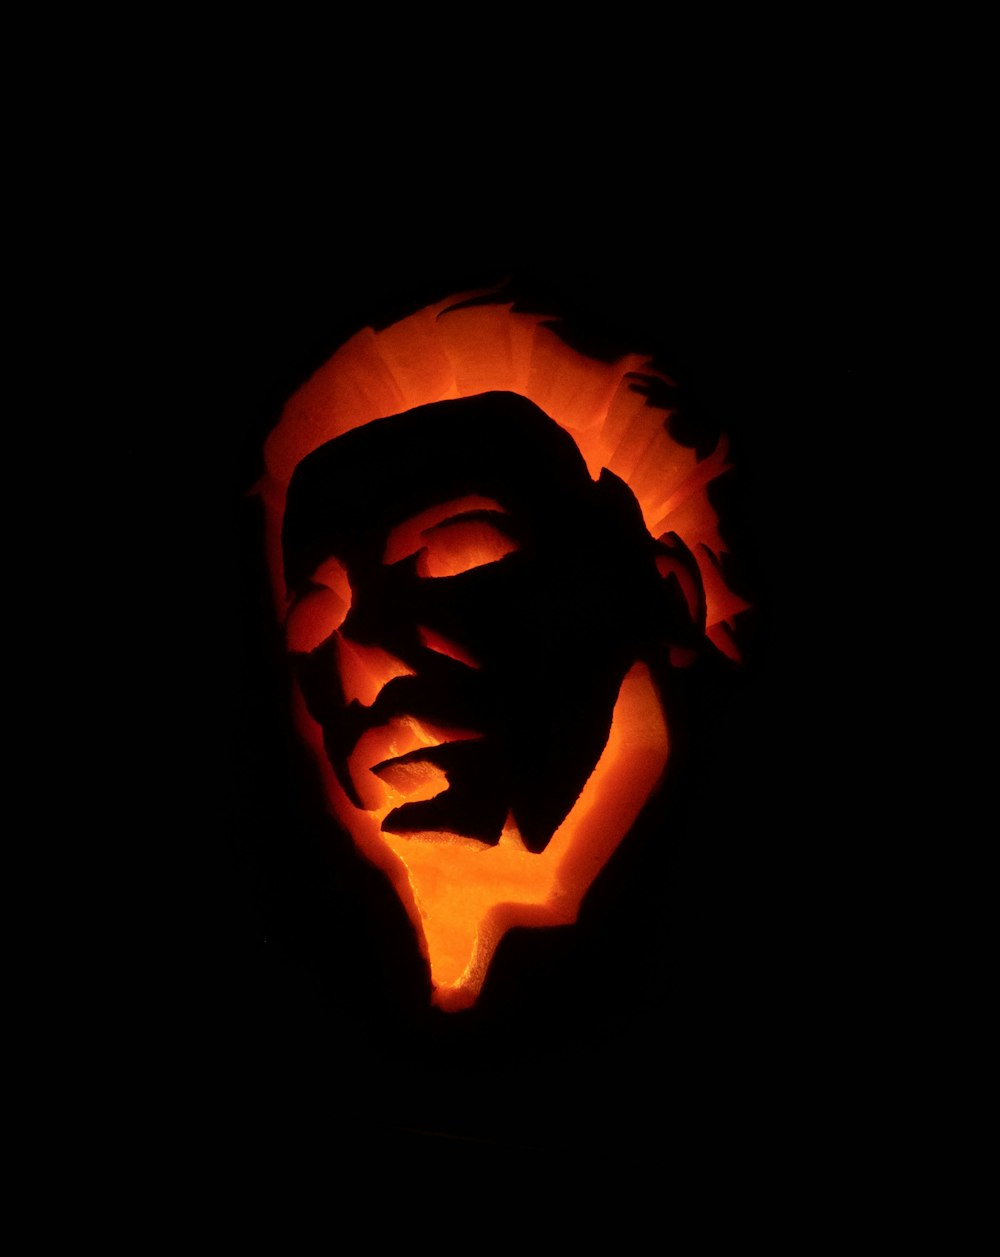 a carved pumpkin with a face